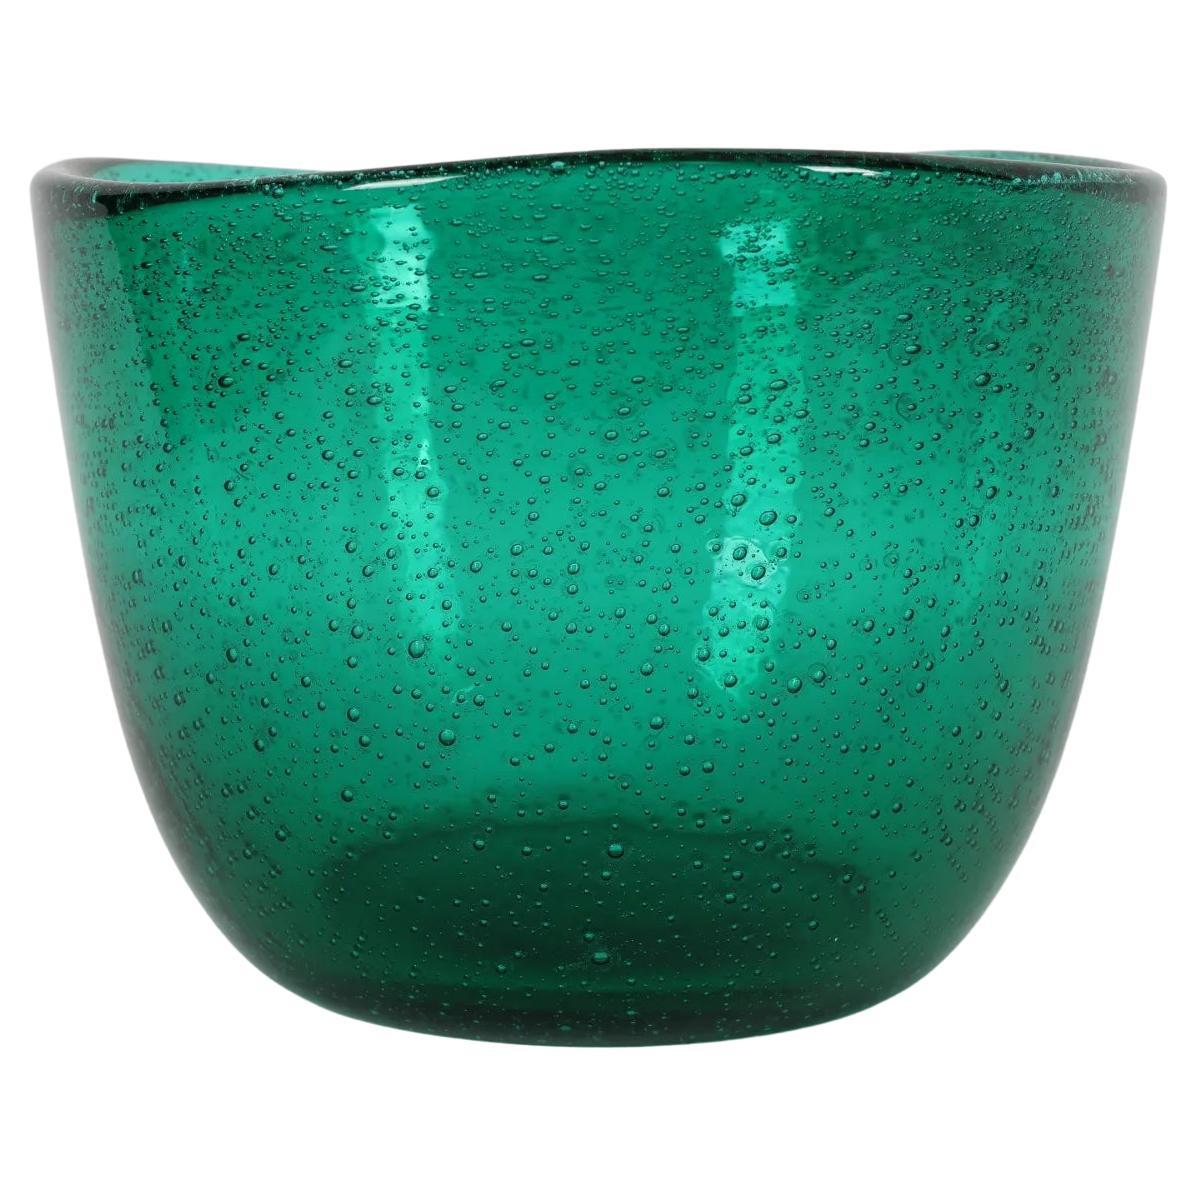 Green Glass Bubble Bowl in the Greenland-Jutrem Pattern by Hadeland